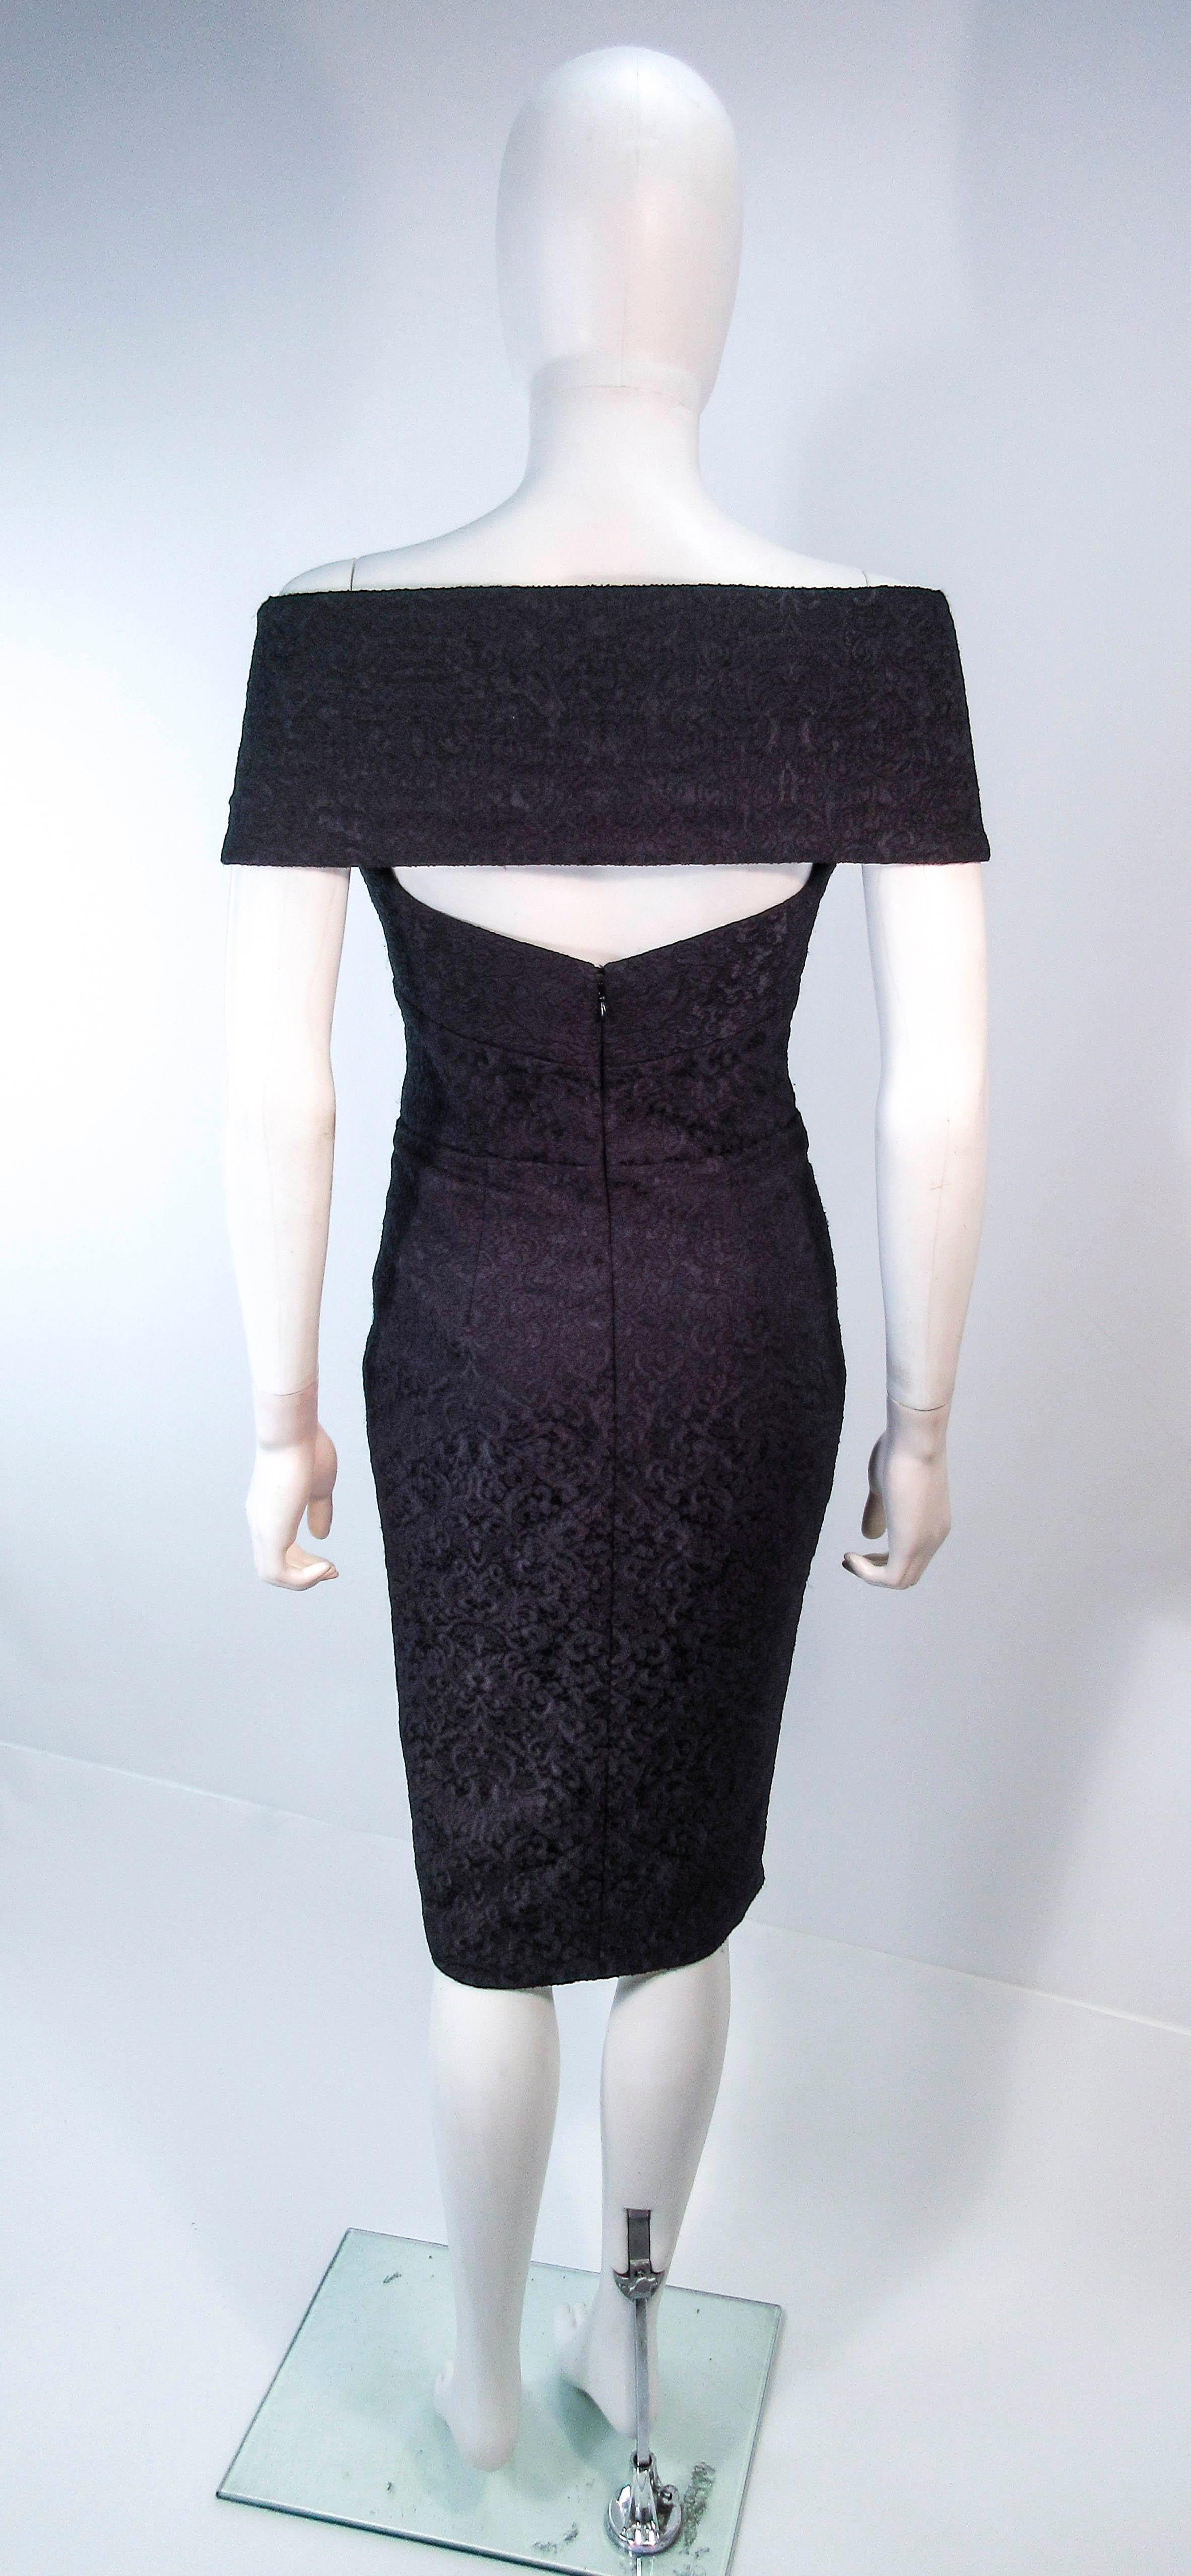 ELIZABETH MASON COUTURE 'MARIA' Black Stretch Lace Cocktail Dress Made to Order For Sale 6